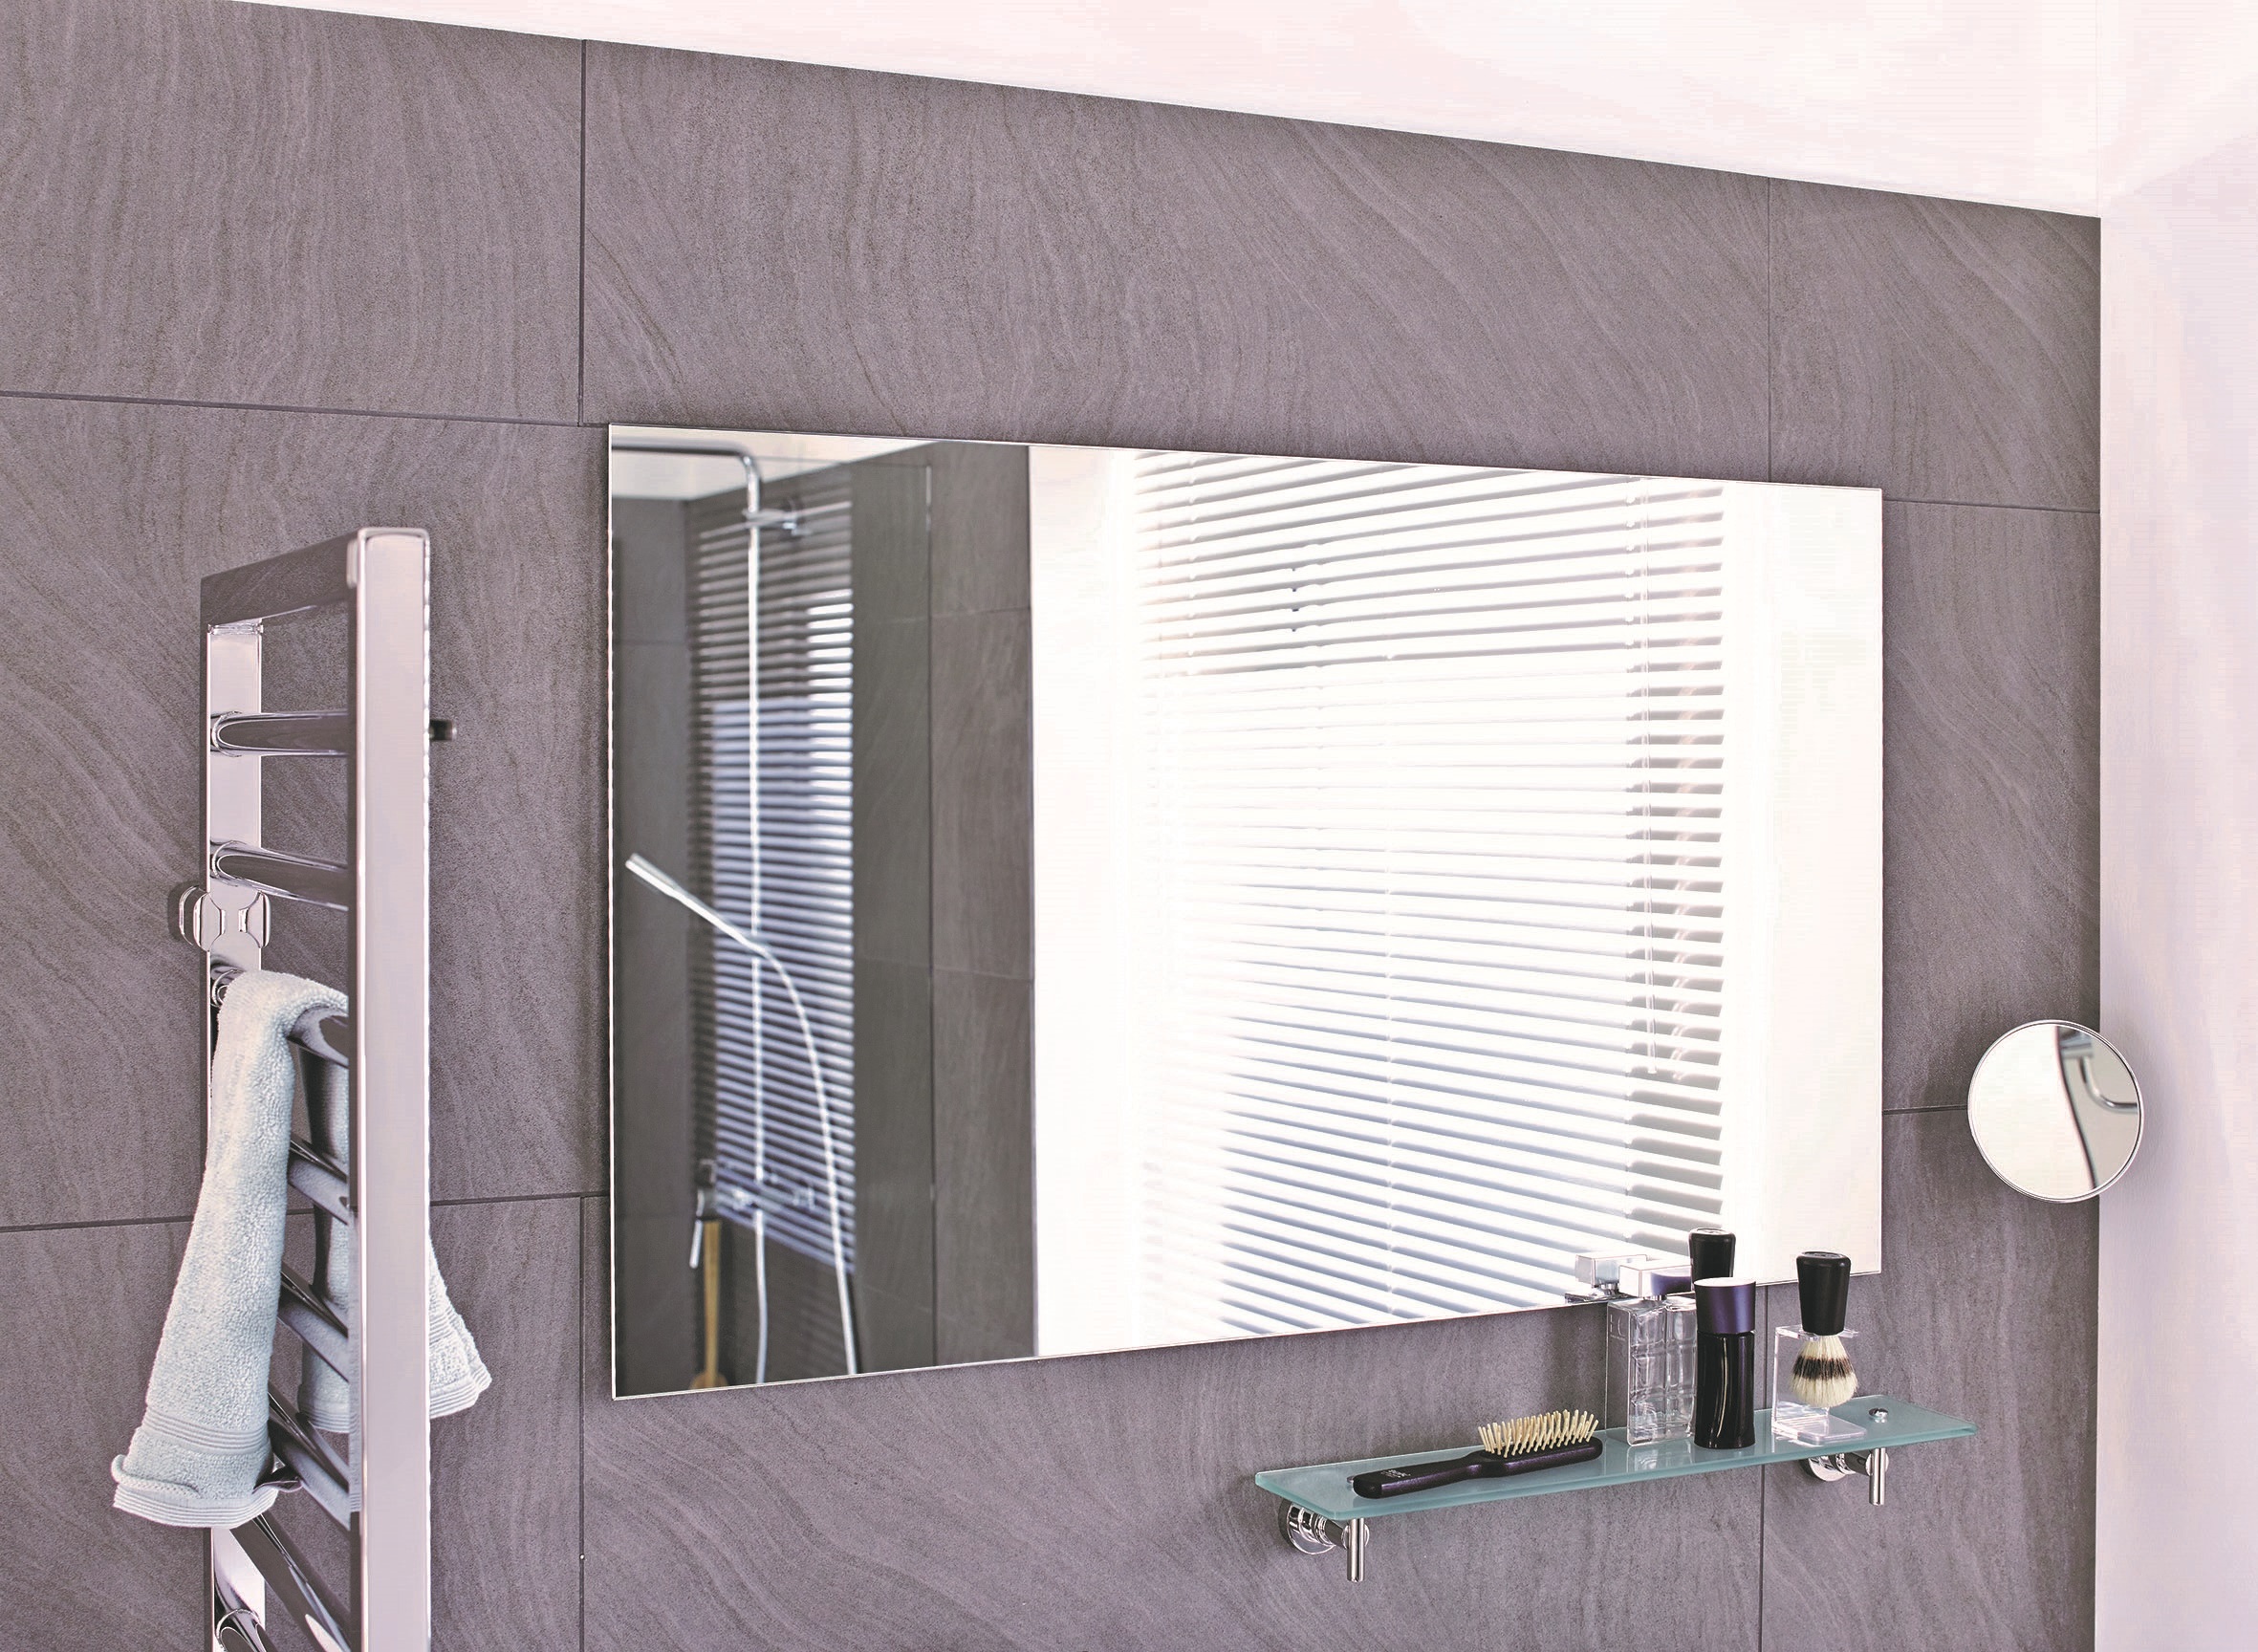 NEXT GENERATION MIRROR PROVIDES HEALTHY ECO-FRIENDLY OPTION @SG_GlassExperts